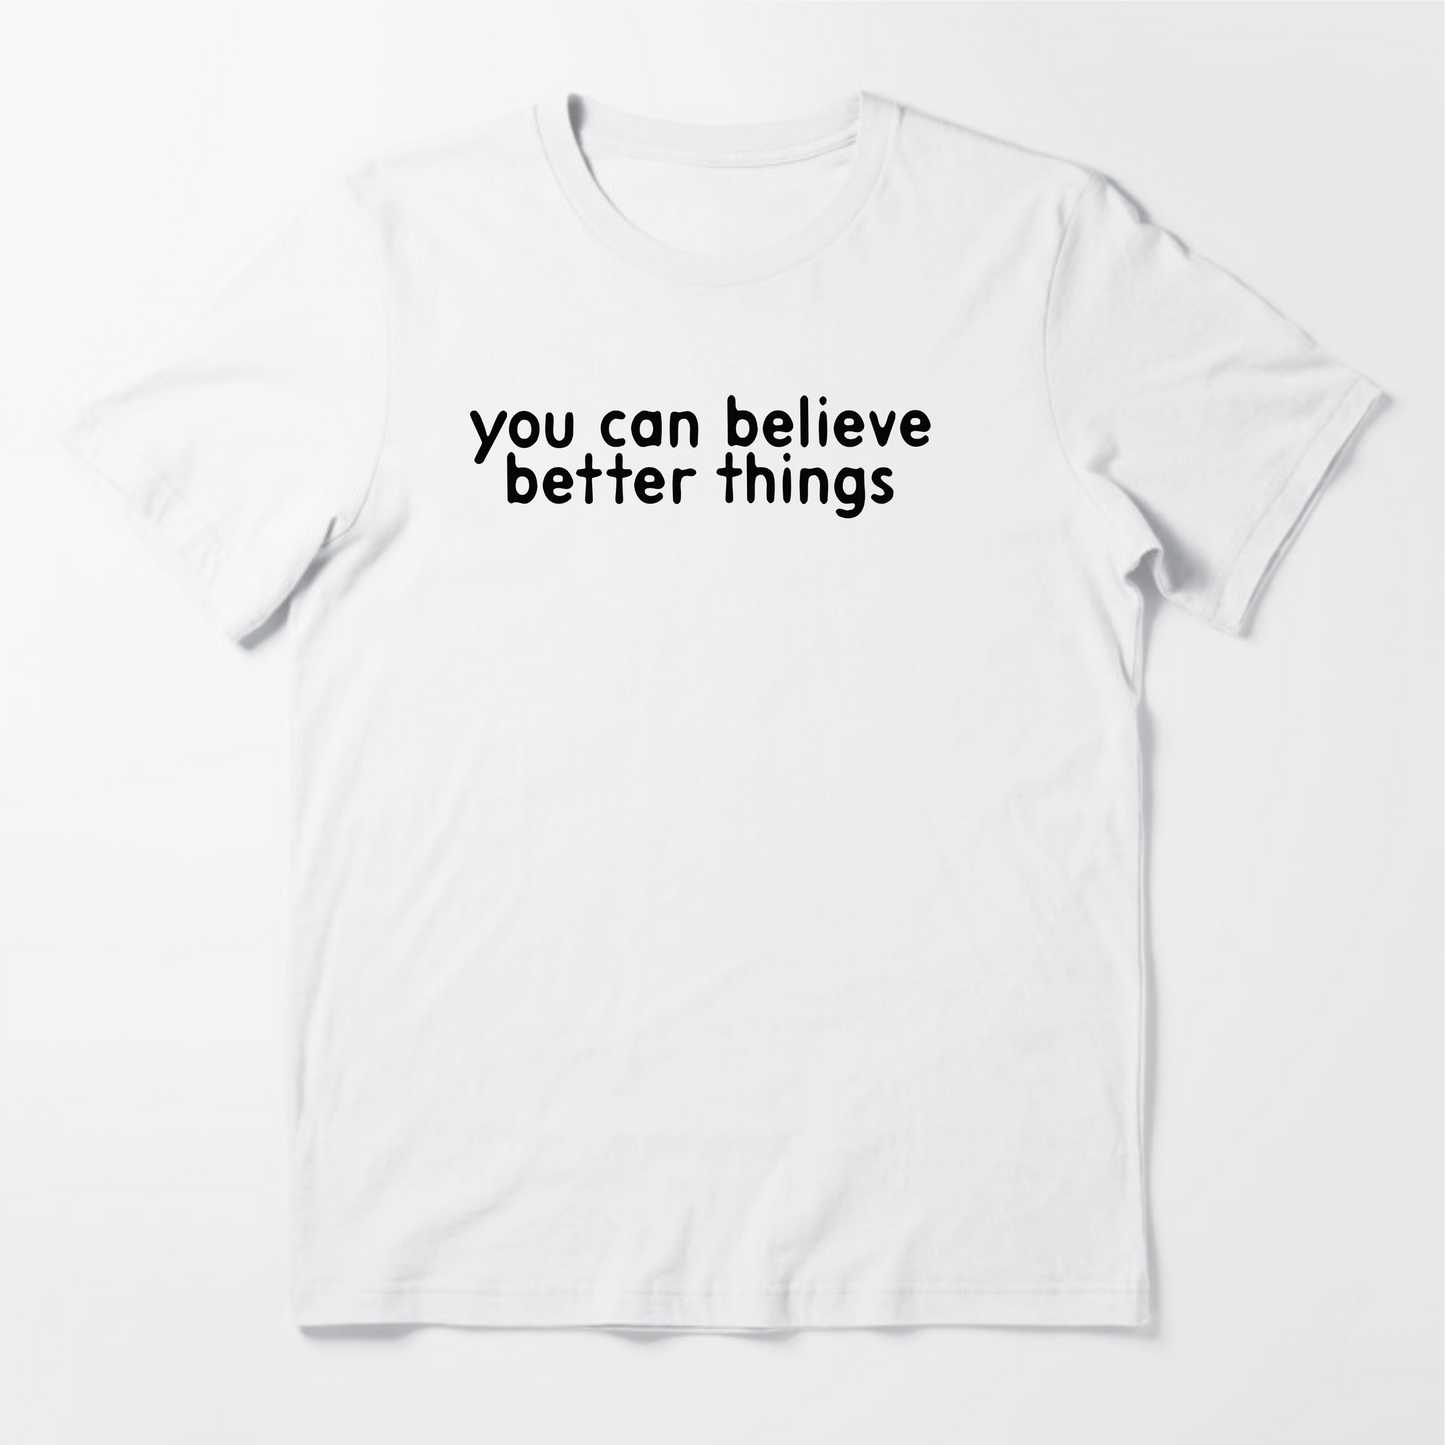 YOU CAN BELIEVE BETTER (EMBROIDERED) THINGS